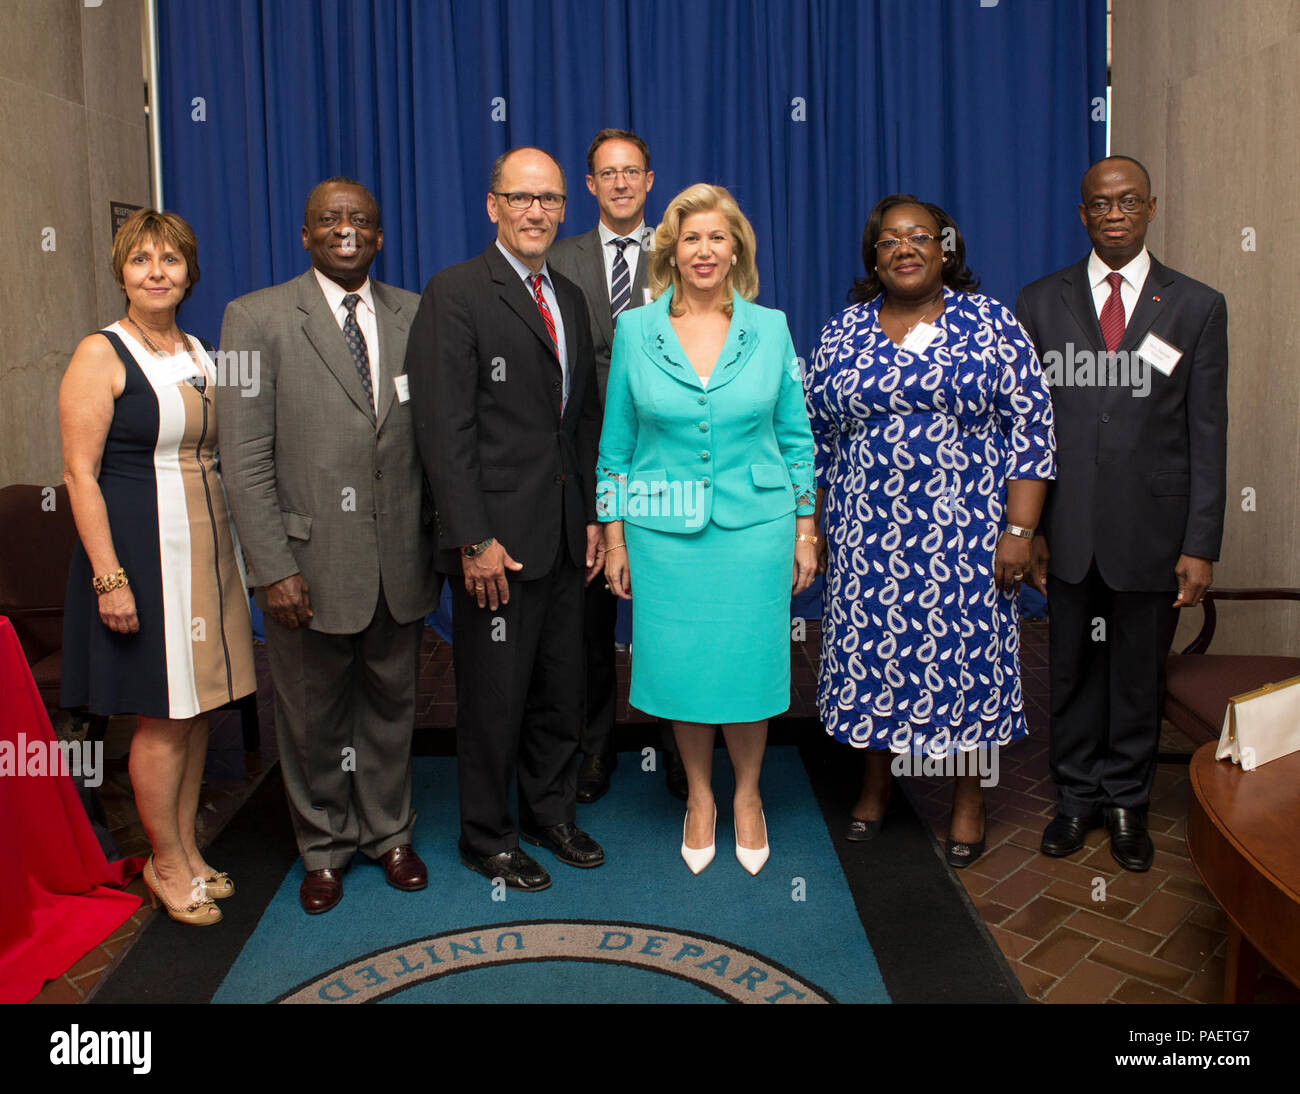 24 June 2015 Р Washington, DC Р U.S. Secretary of Labor Thomas Perez delivers remarks at the ILAB Cocoa Meetings.  Prior to the start of the meeting Secretary Perez meets with Madame Dominique Ouattara, First Lady of the Republic of Cote D'Ivoire. Pictured from Left to Right: Susan Snyder Smith, Ebenezer Adjirackov, Minister of Trade for the Embassy of Ghana, Secretary Thomas Perez, Bill Guyton, President and CEO of the World Cocoa Foundation, Madame Dominique Ouattara, First Lady of the Republic of Cote D'Ivoire, Anne Desiree Ouloto, Minister of Solidarity, Family, Women, and Children of Cote Stock Photo